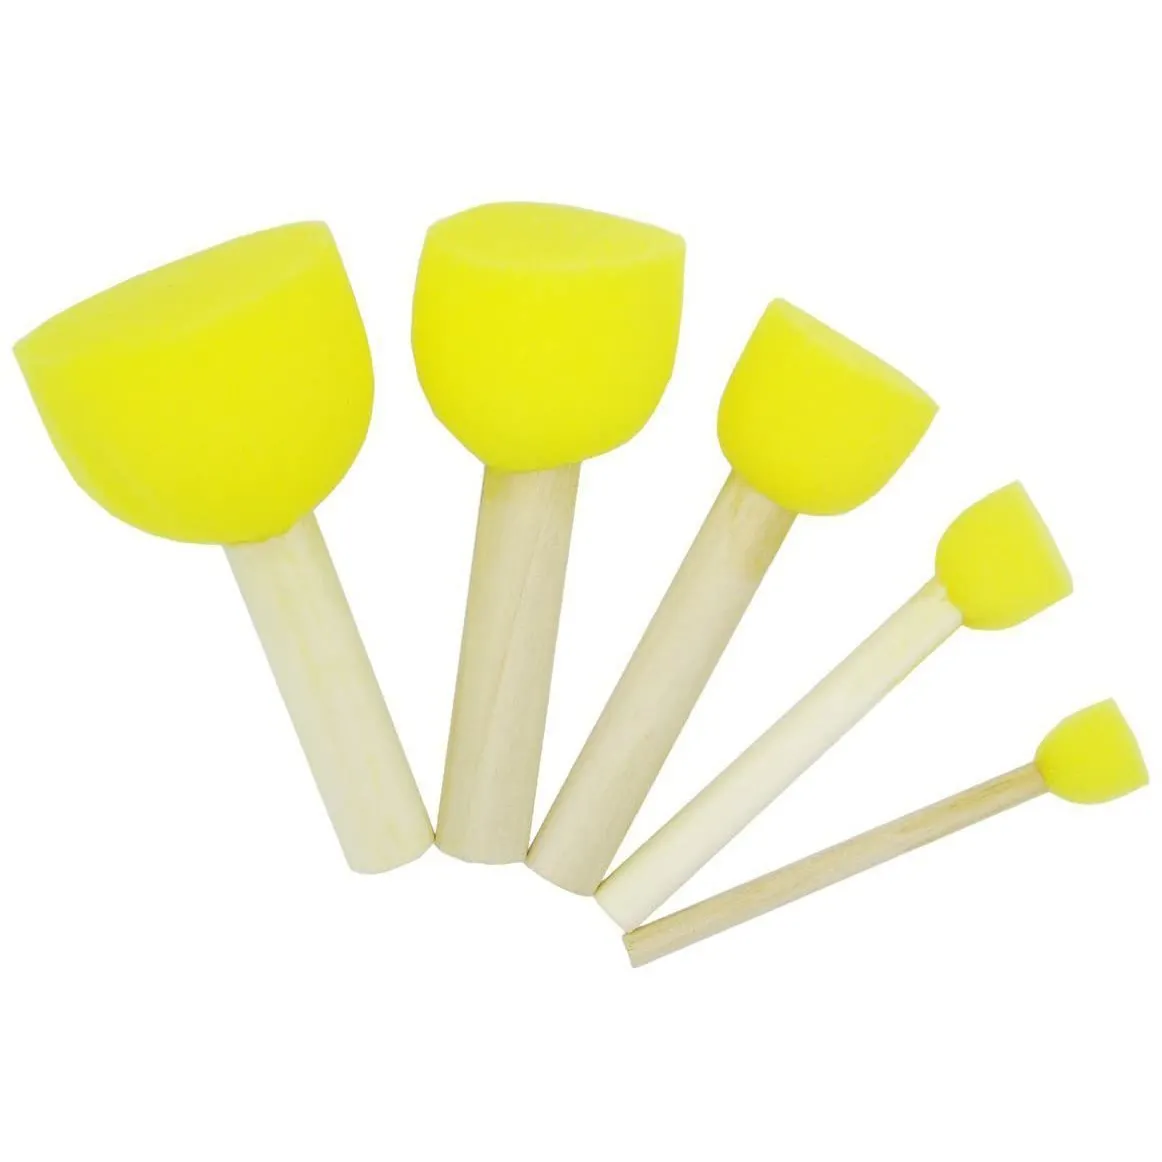 Painting Tools Wooden Handle Round Sponge Foam Brush Set Paint Sponge Foam Paint Brush for Kids Painting Crafts